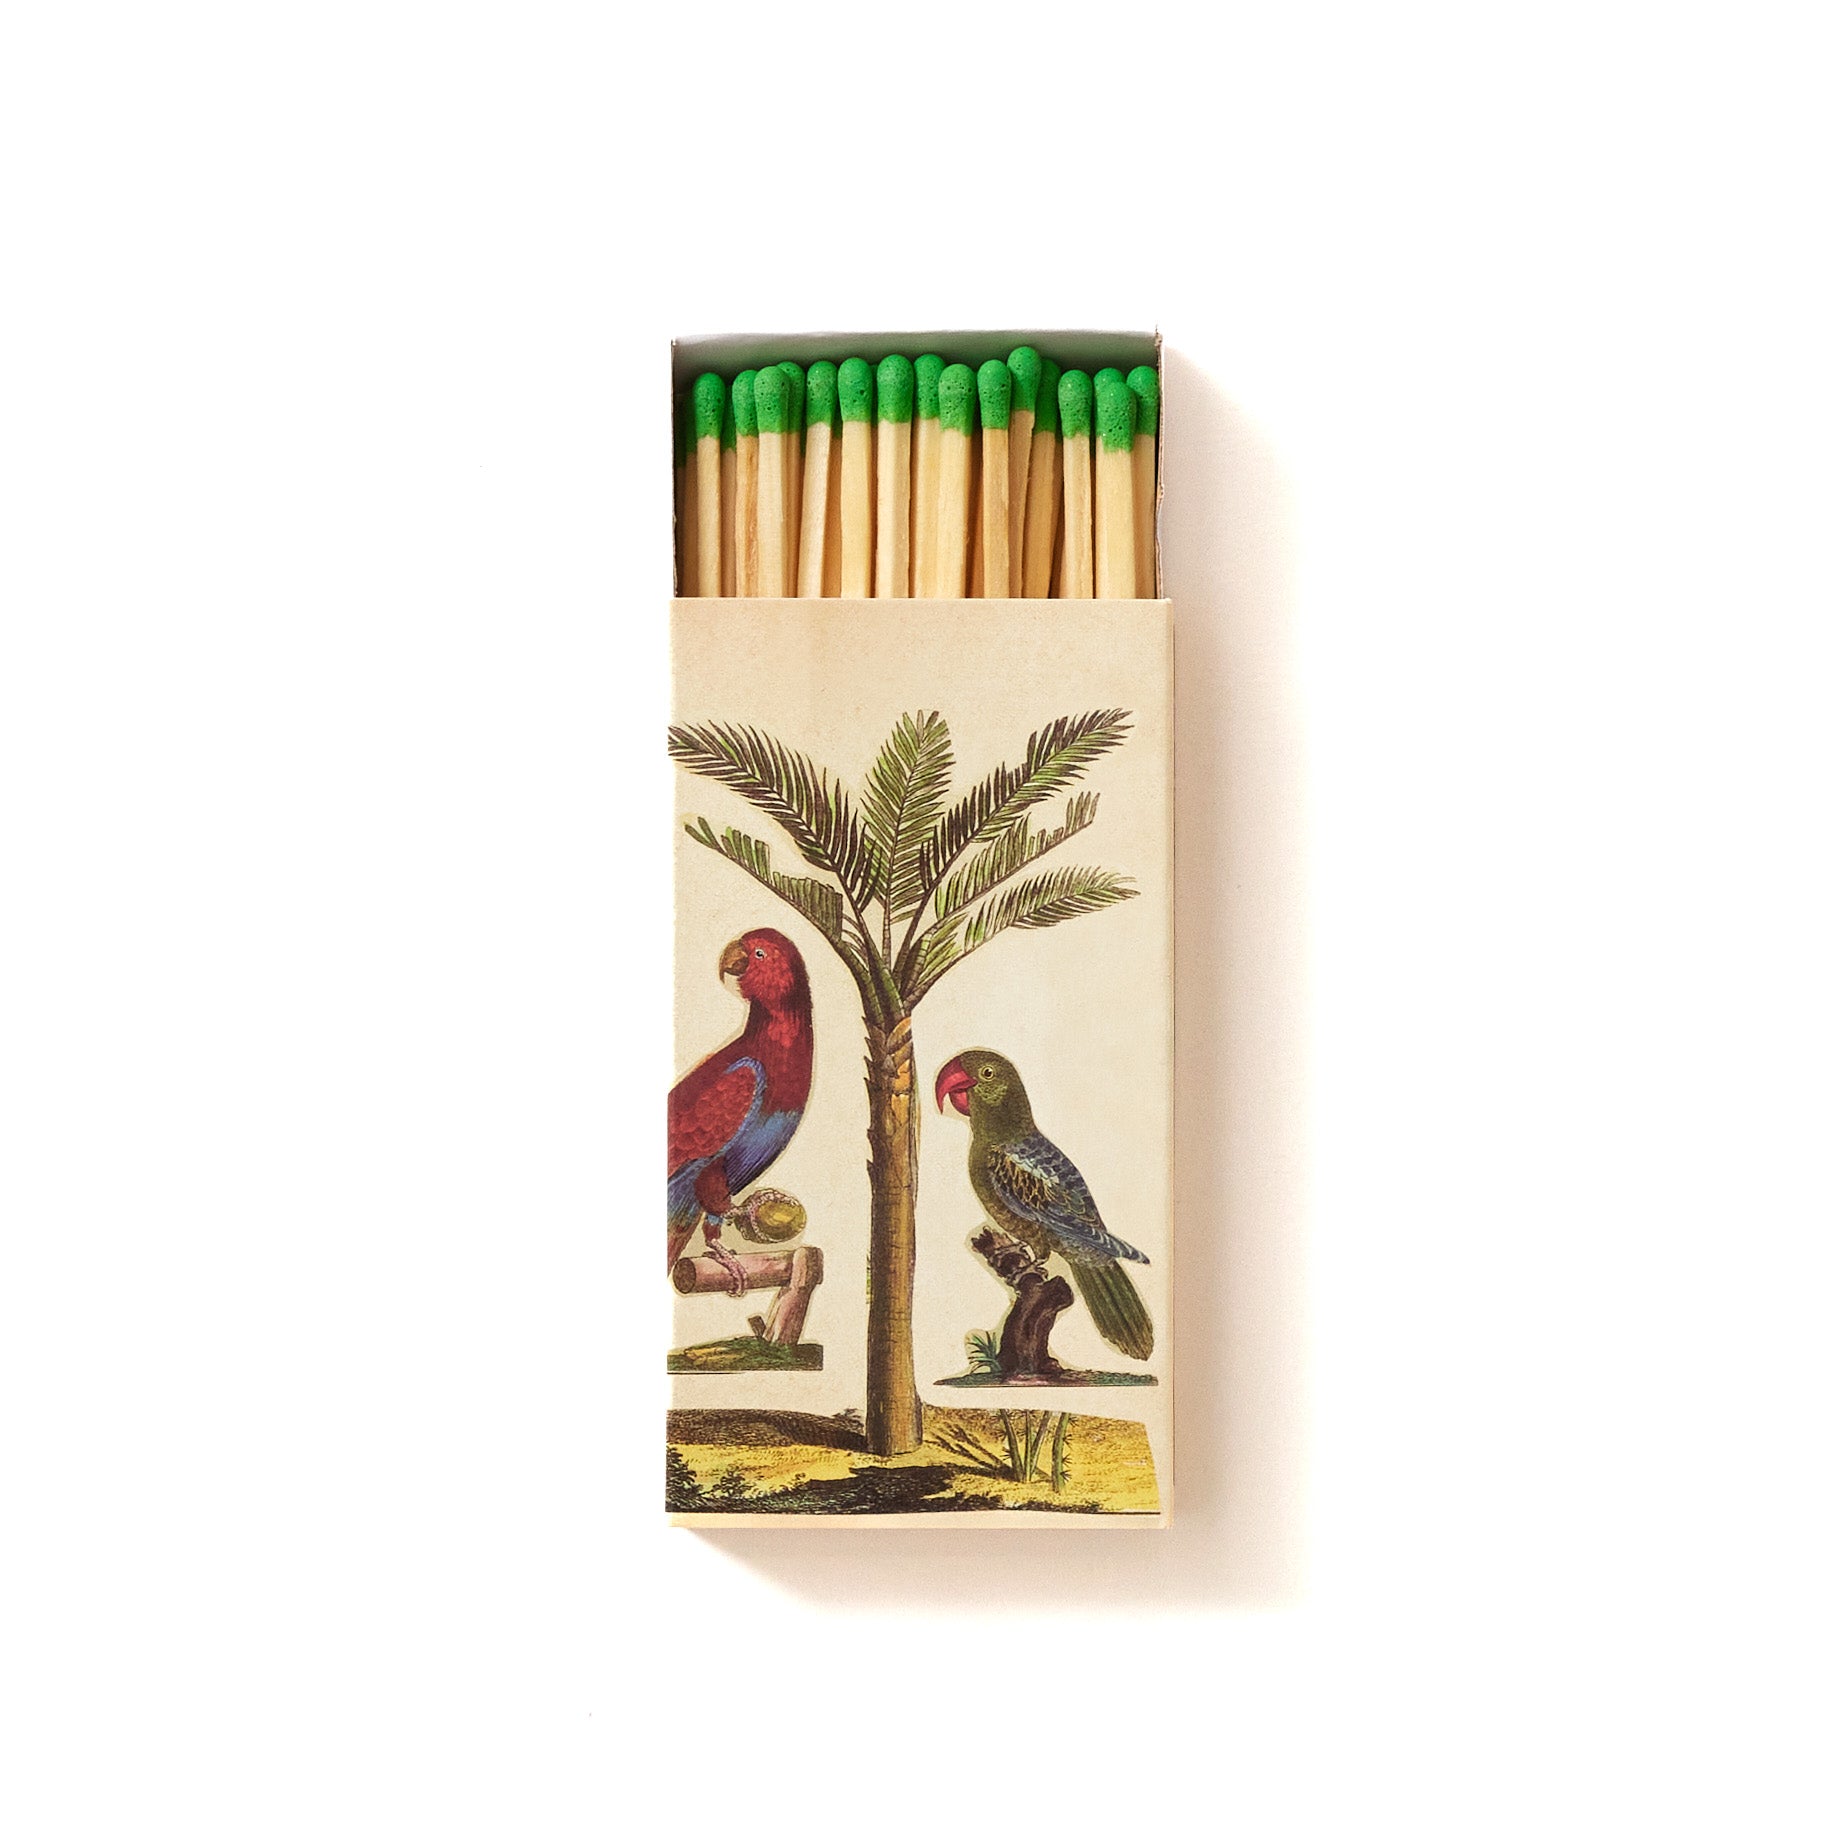 Box of Warm Wishes Designer Matches with a tropical parrot motif